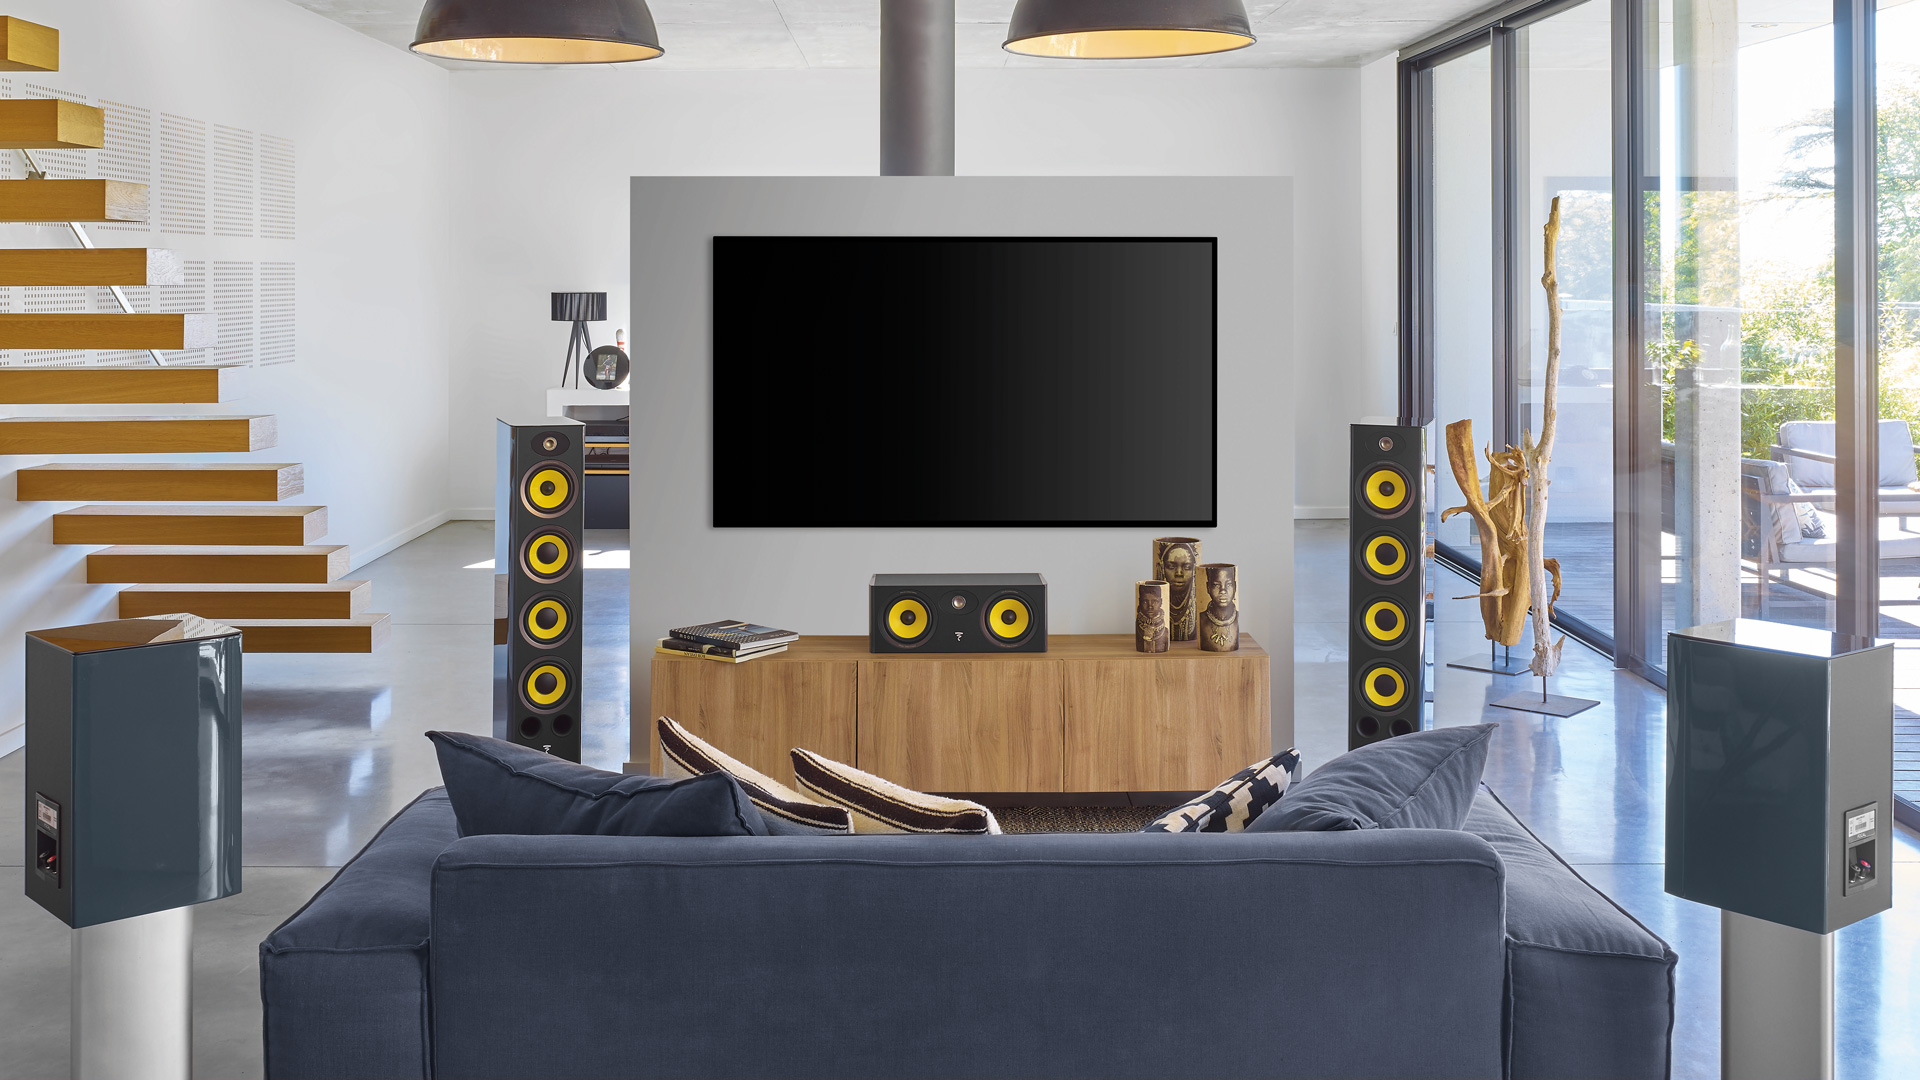 The Focal Aria K2 Speakers in a Home Theater Setup (Image Credit: Focal)